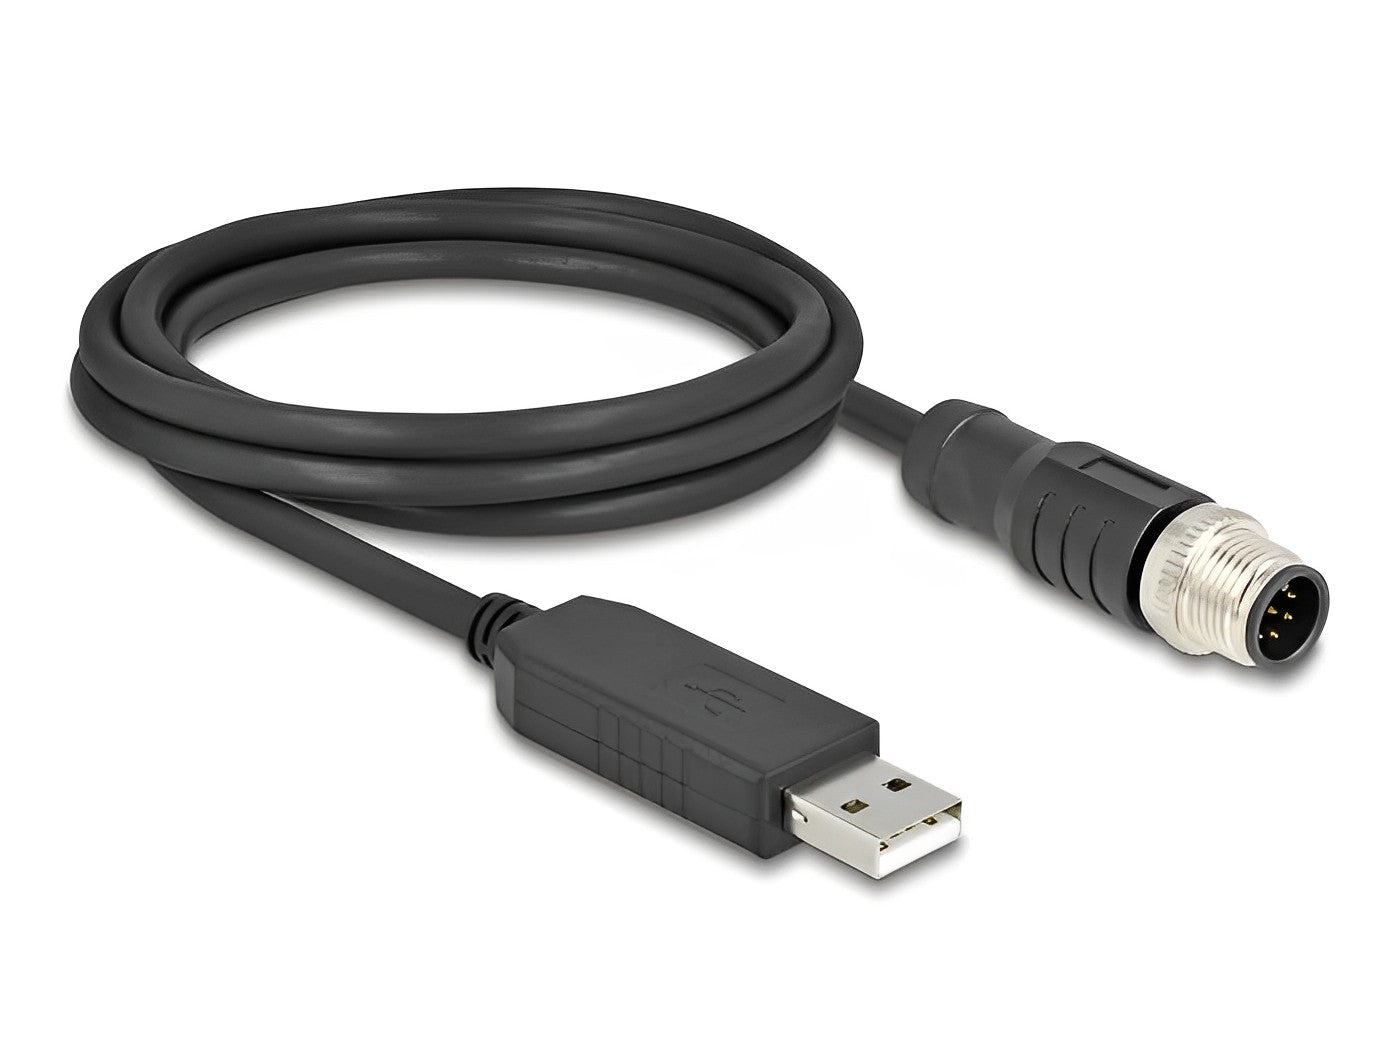 Delock M12 Serial Connection Cable with FTDI chipset, USB 2.0 Type-A male to M12 RS-232 male A-coded 8 pin 1.8 m black - delock.israel